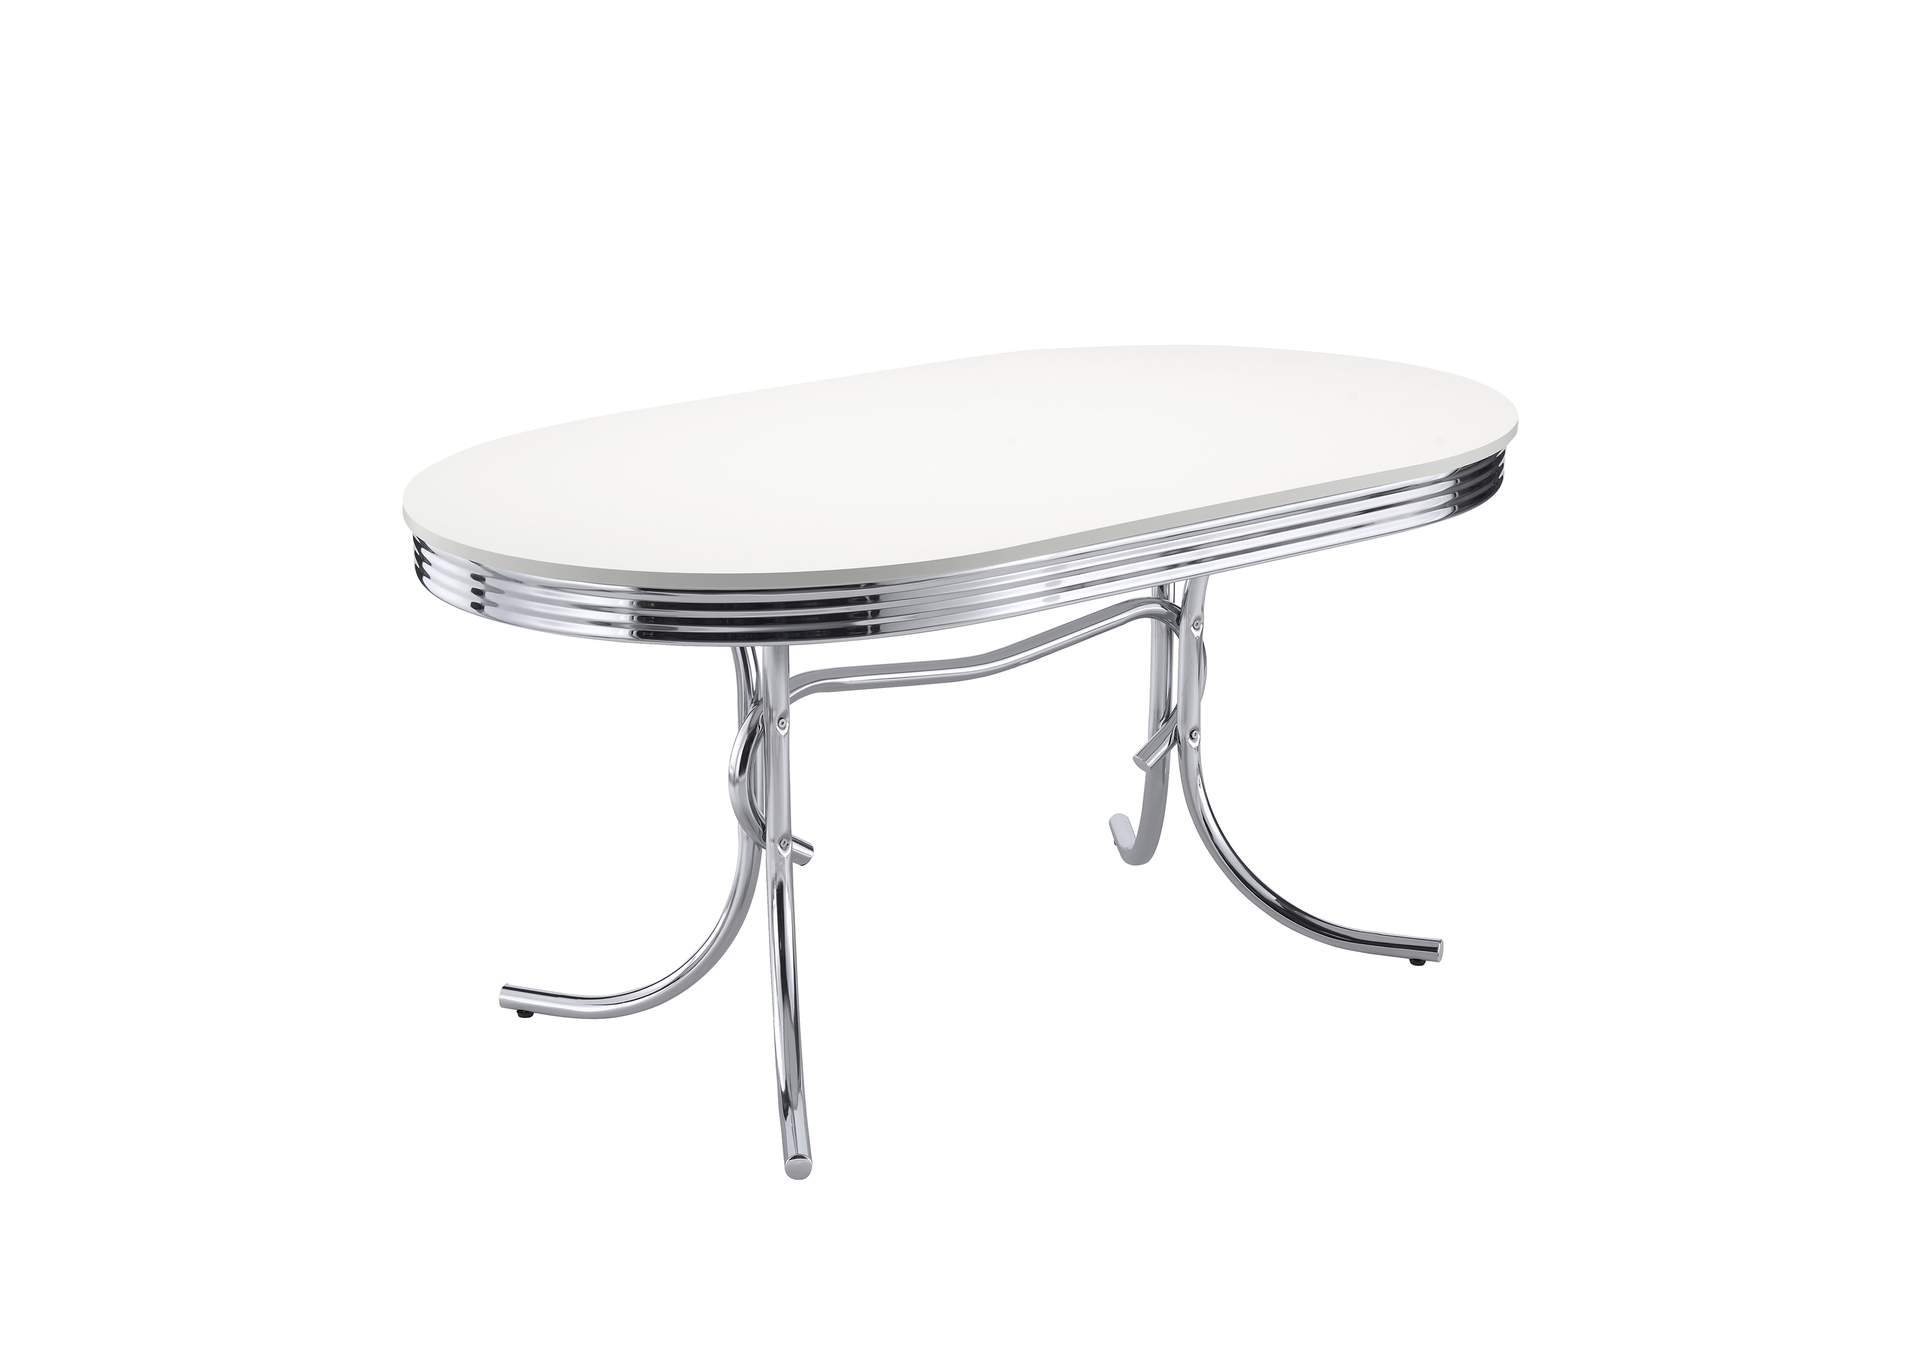 Retro Oval Dining Table Glossy White and Chrome,Coaster Furniture